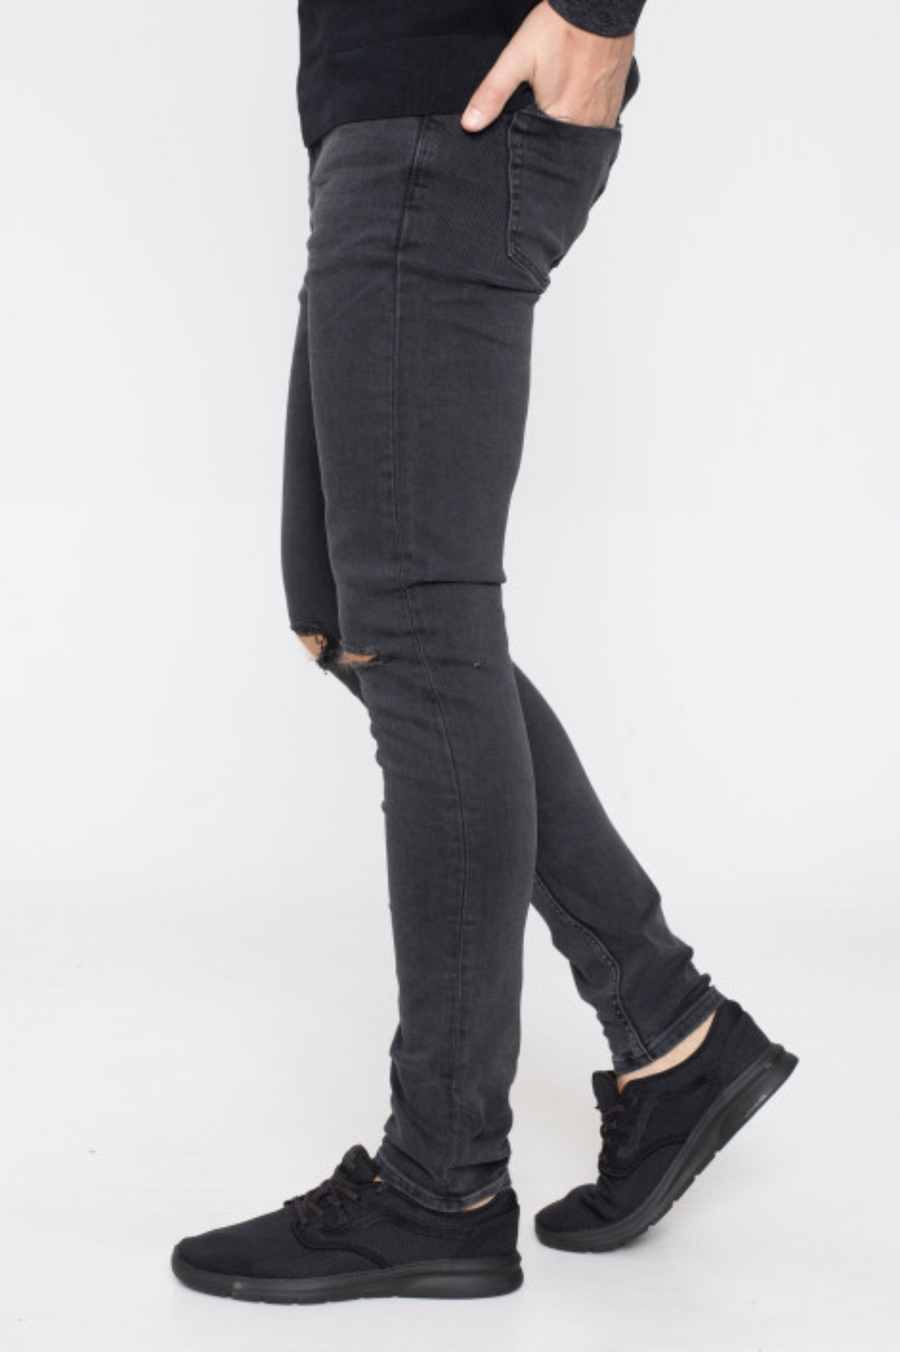 Chase Skinny Jeans - Greyish Black Ripped Knee